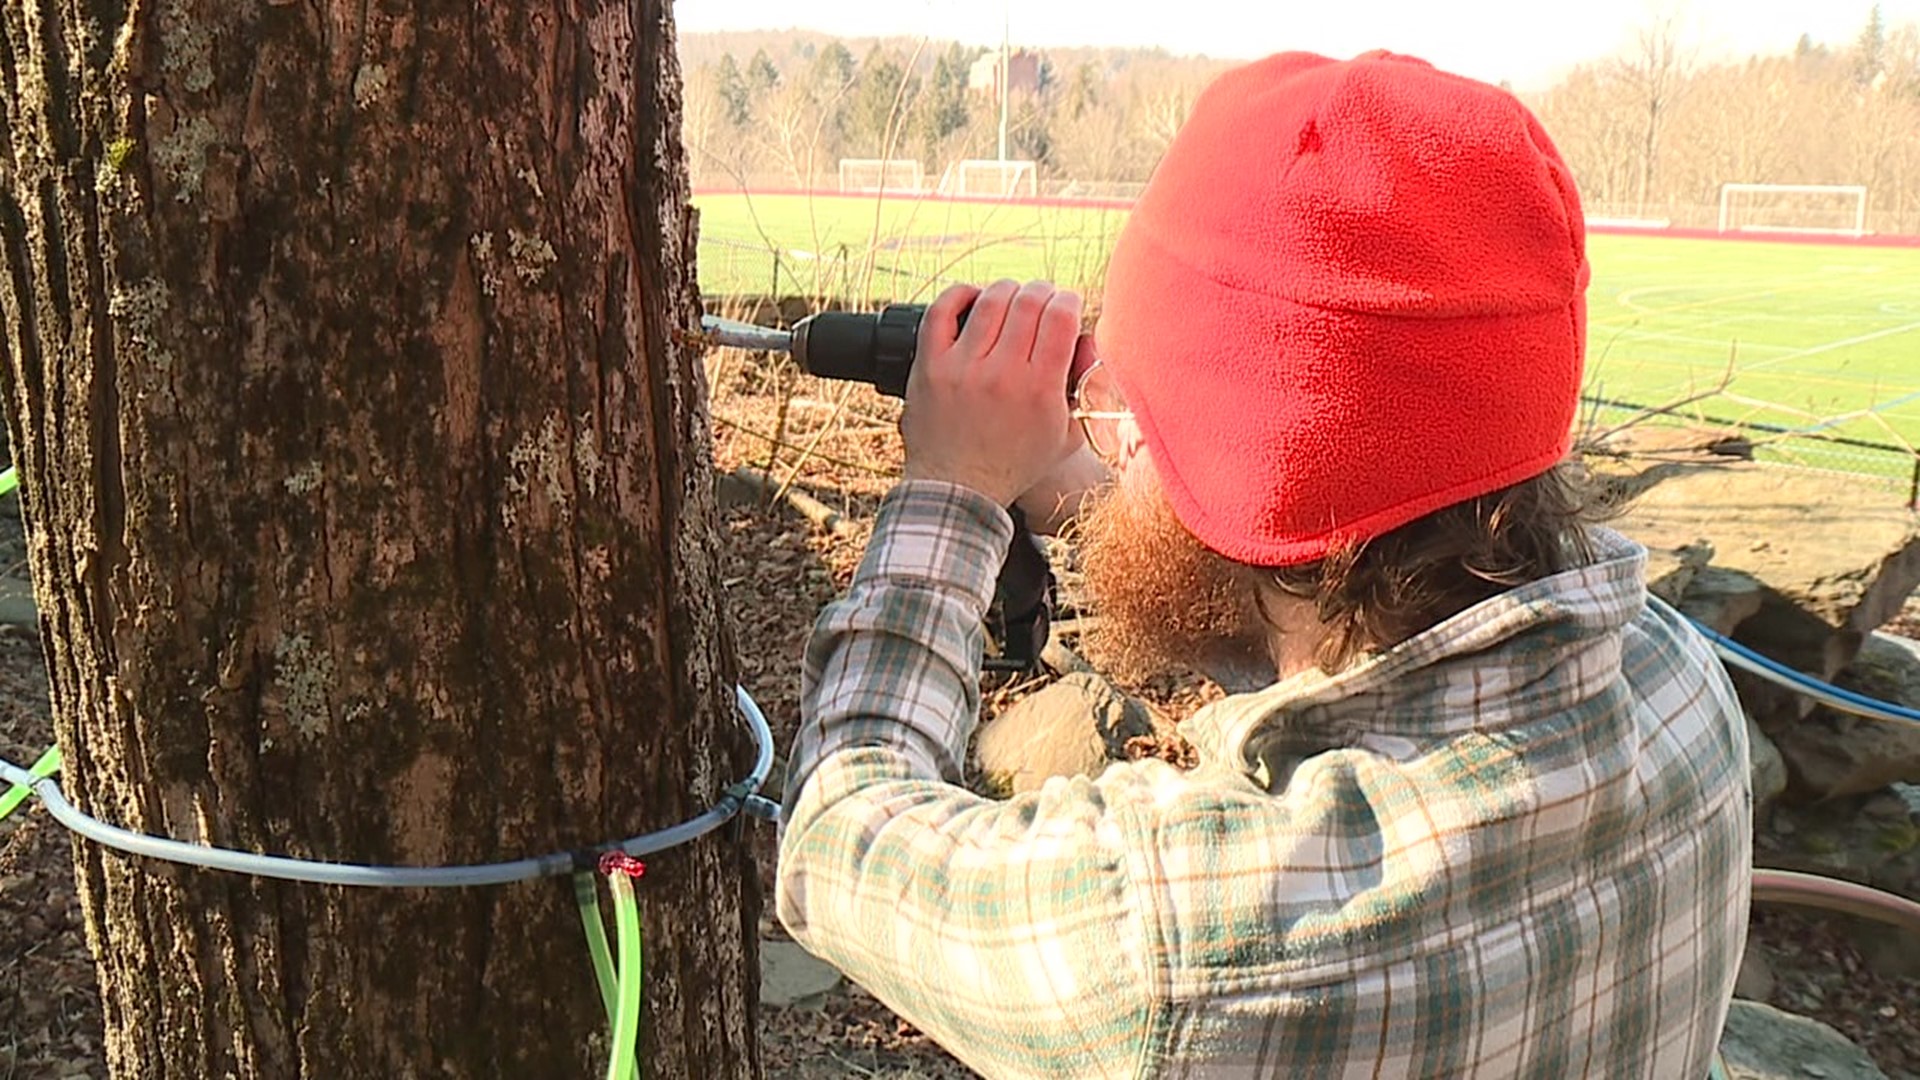 Environmental students at the college have some long days and even longer nights ahead of them over the next several weeks; it's time for maple syrup season.